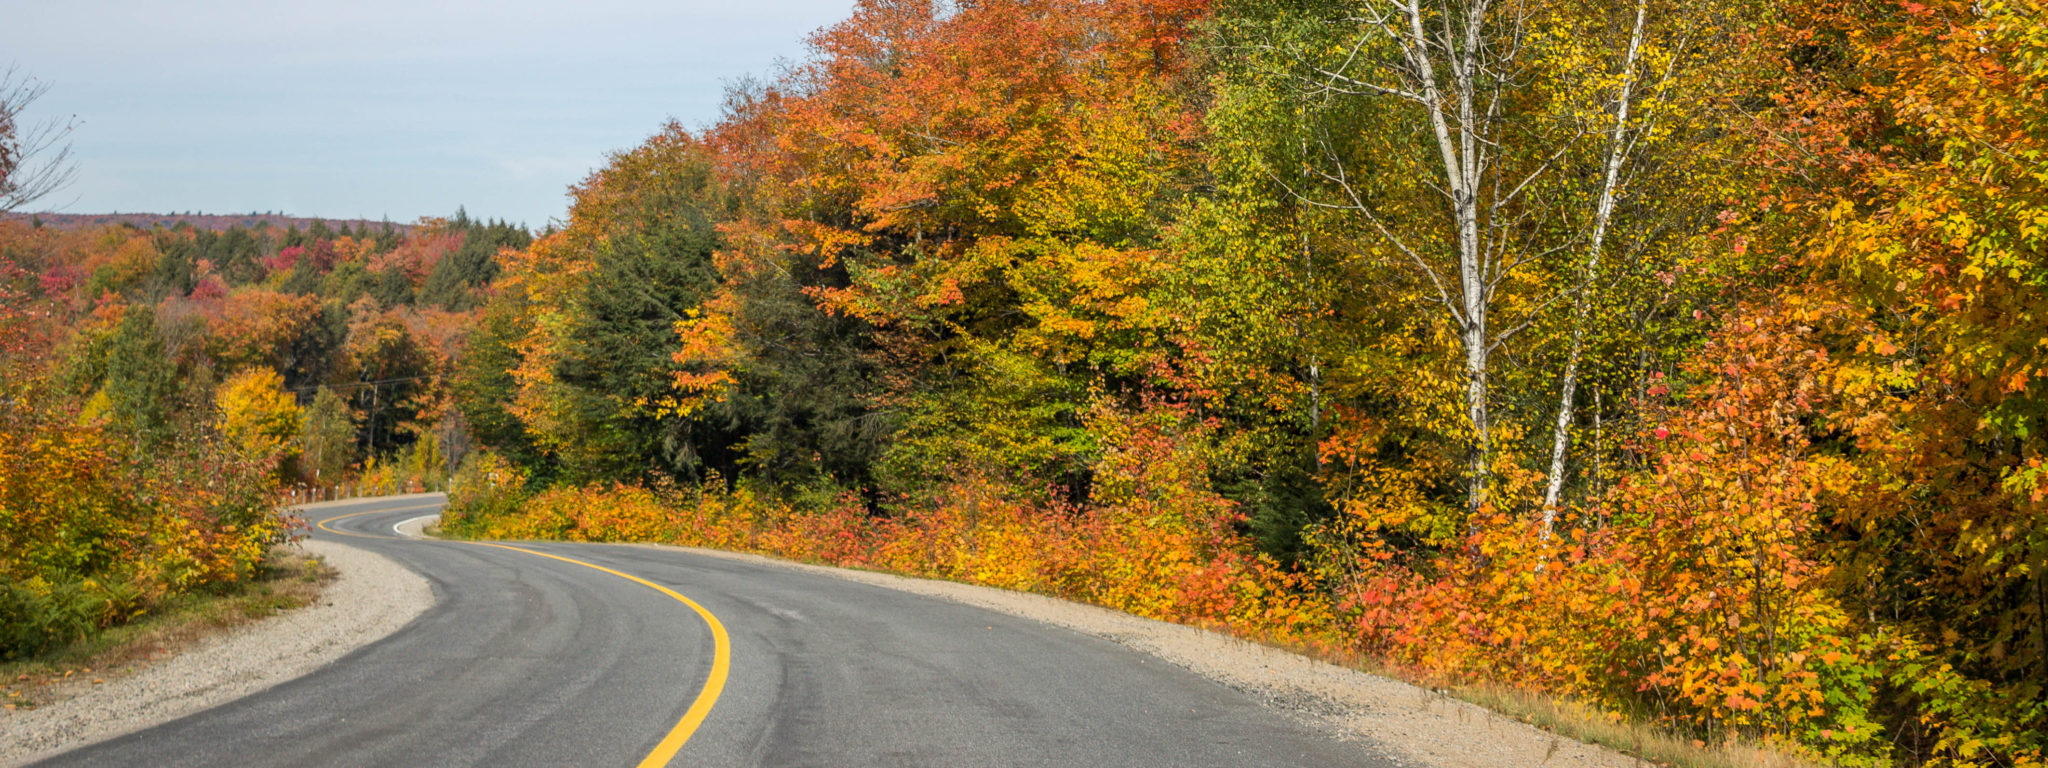 Ontario road trips you can do from Toronto. Road with autumn foliage around it.